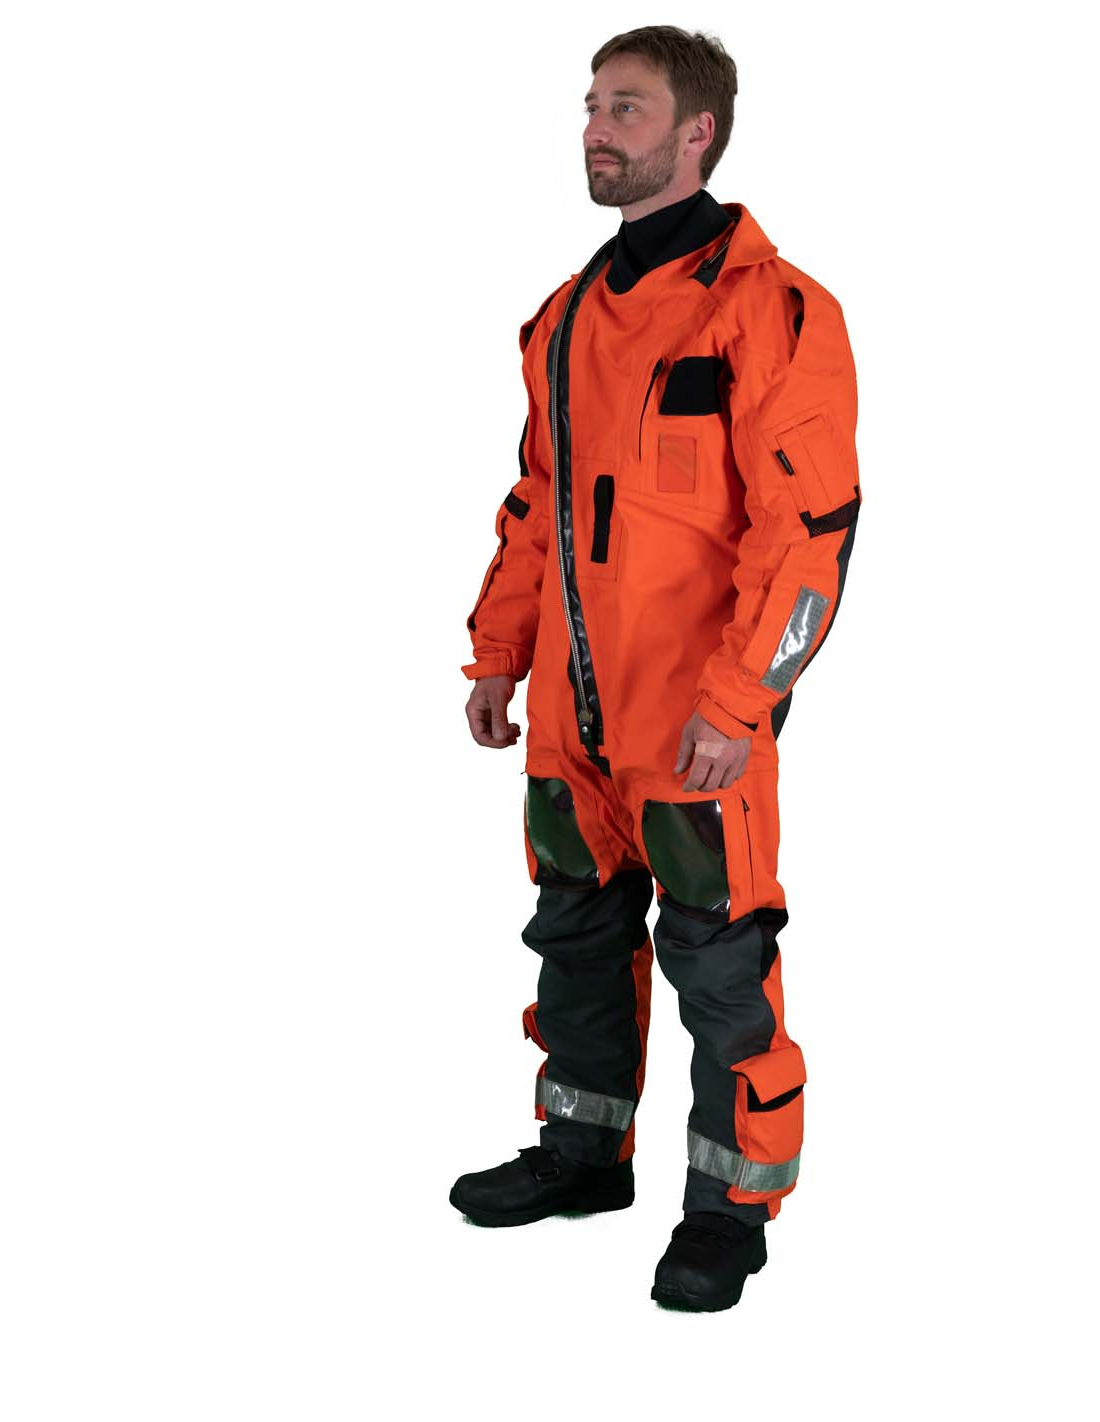 1000S Rear Aircrew J-Don Immersion Suit